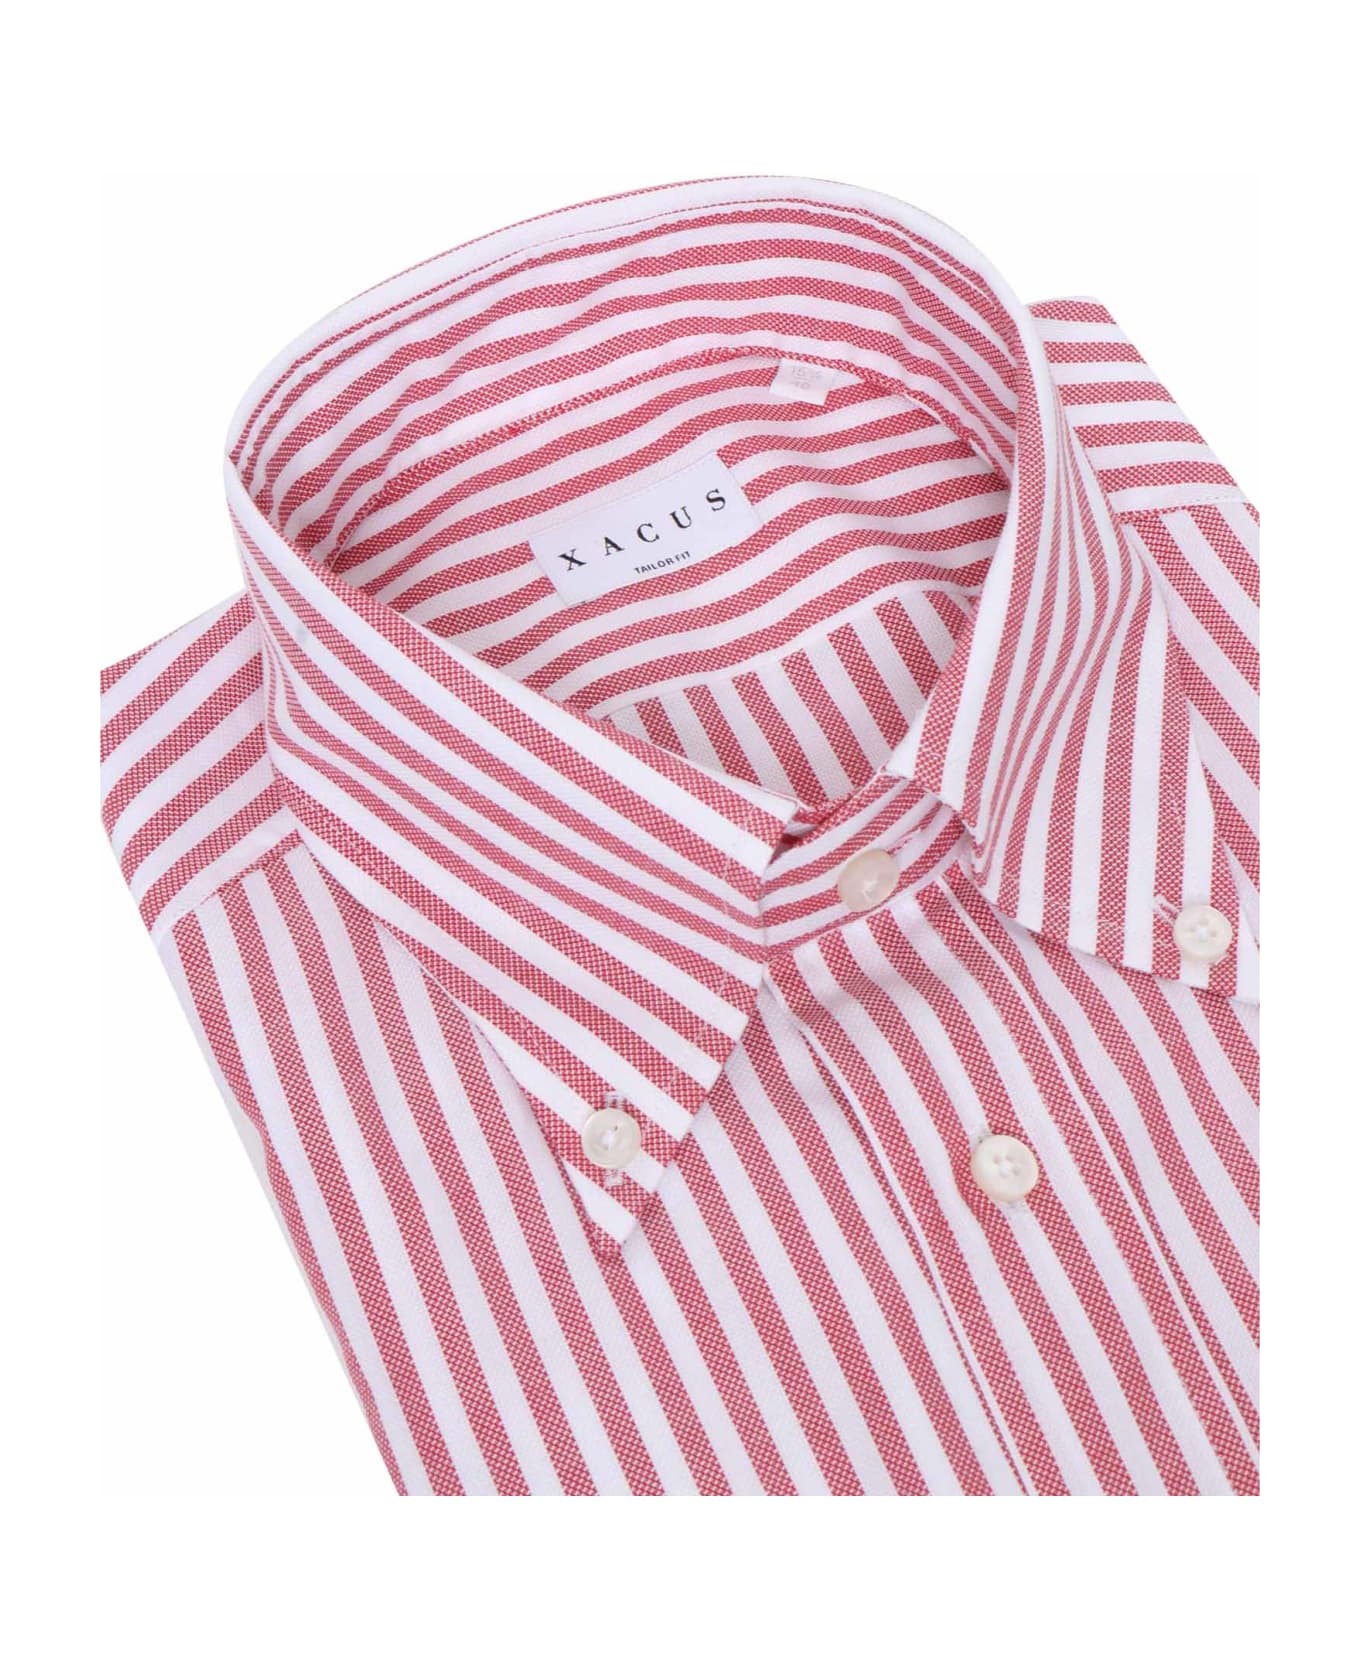 Xacus Red Striped Shirt - MULTICOLOR シャツ